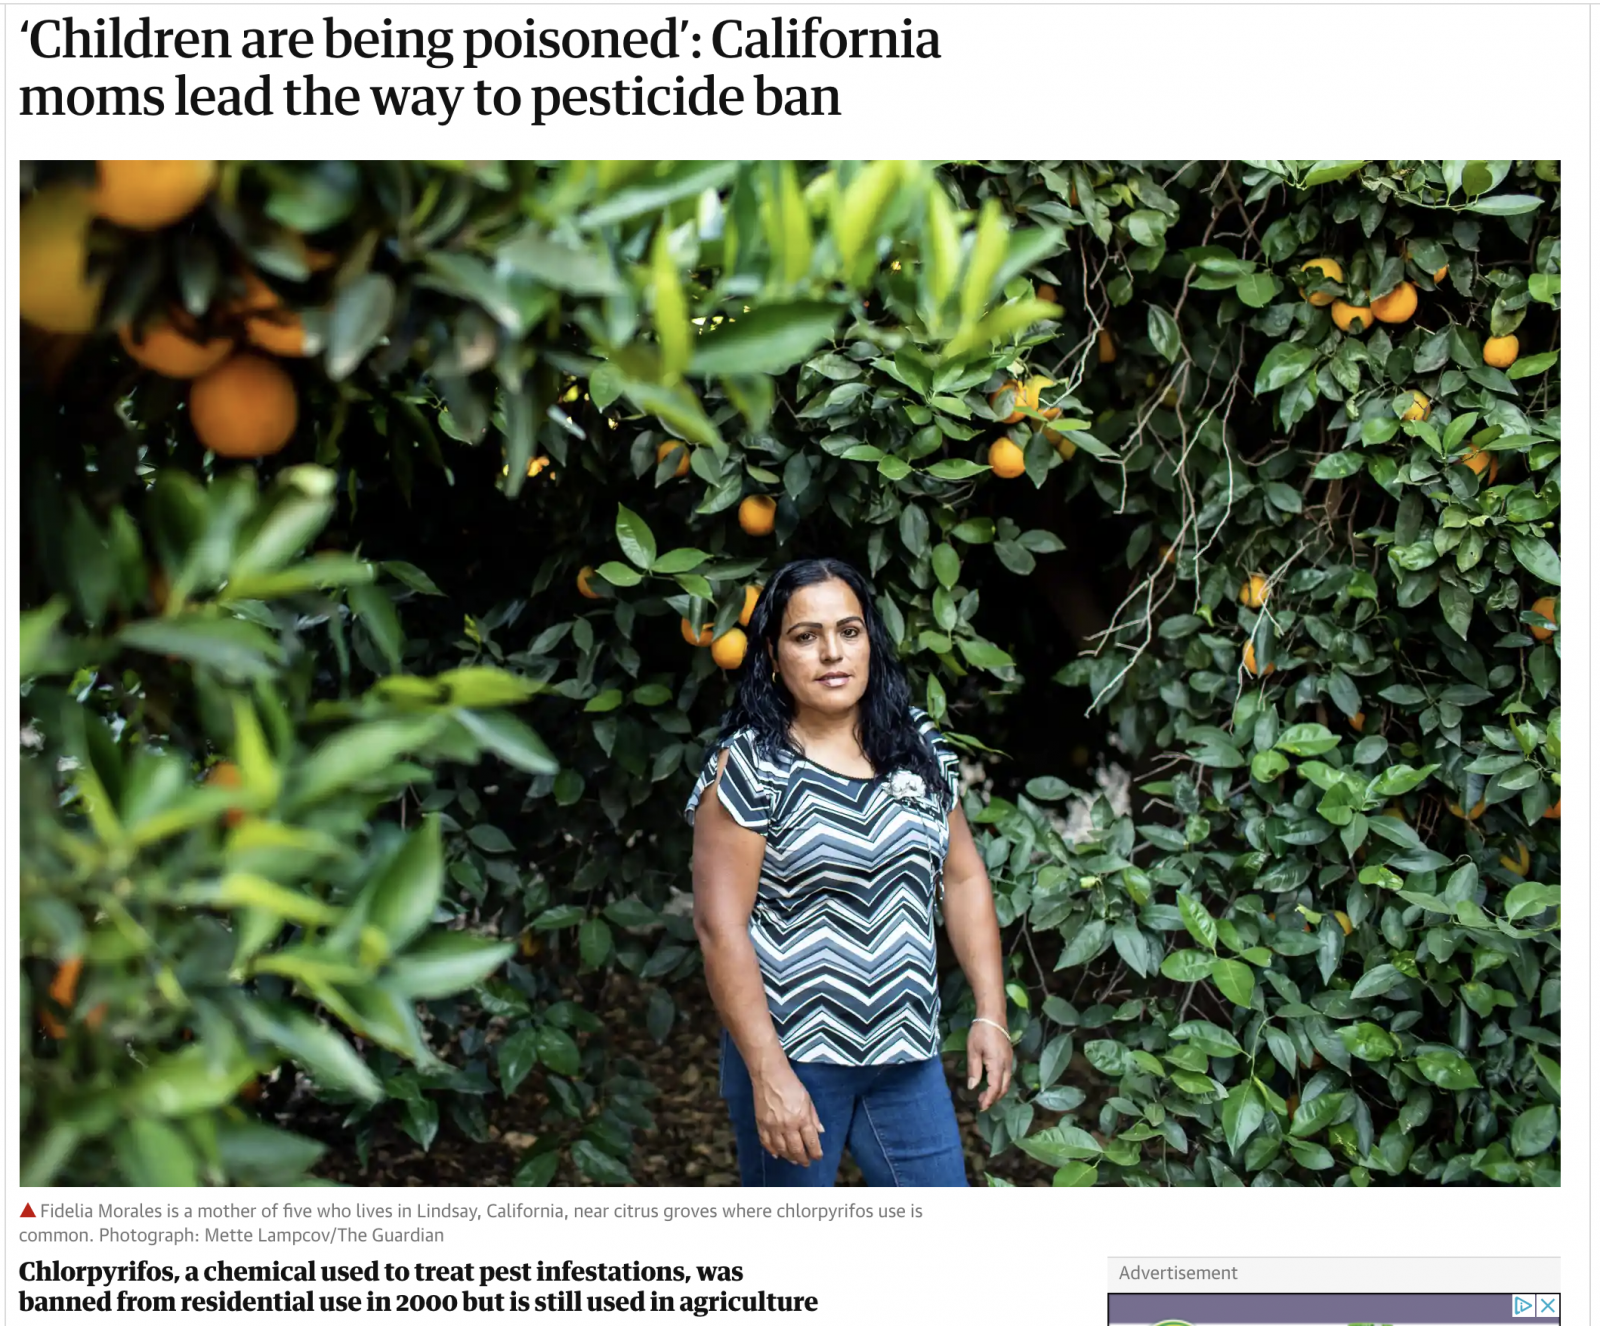 "˜Children are being poisoned': California moms lead the way to pesticide ban